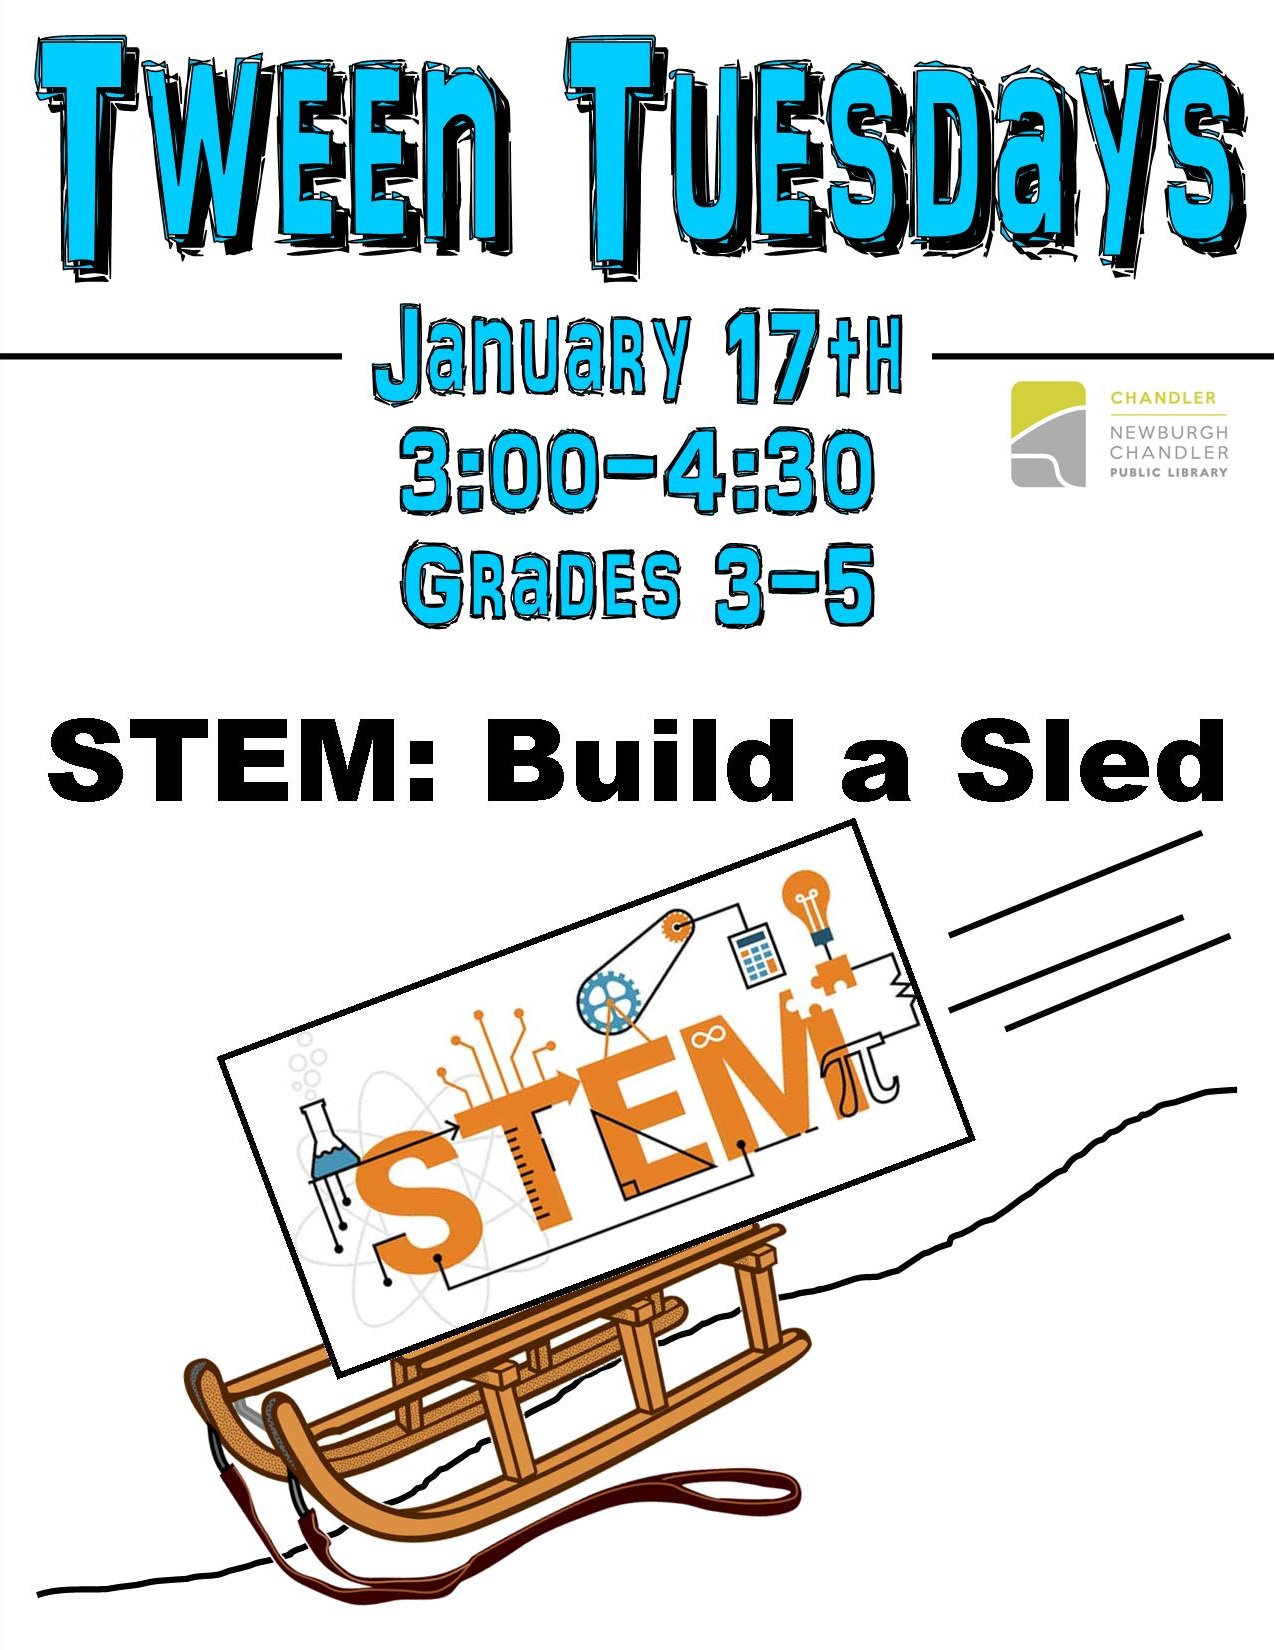 Tween Tuesdays: STEM Build a Sled @ Chandler Library Children's Department | Chandler | Indiana | United States